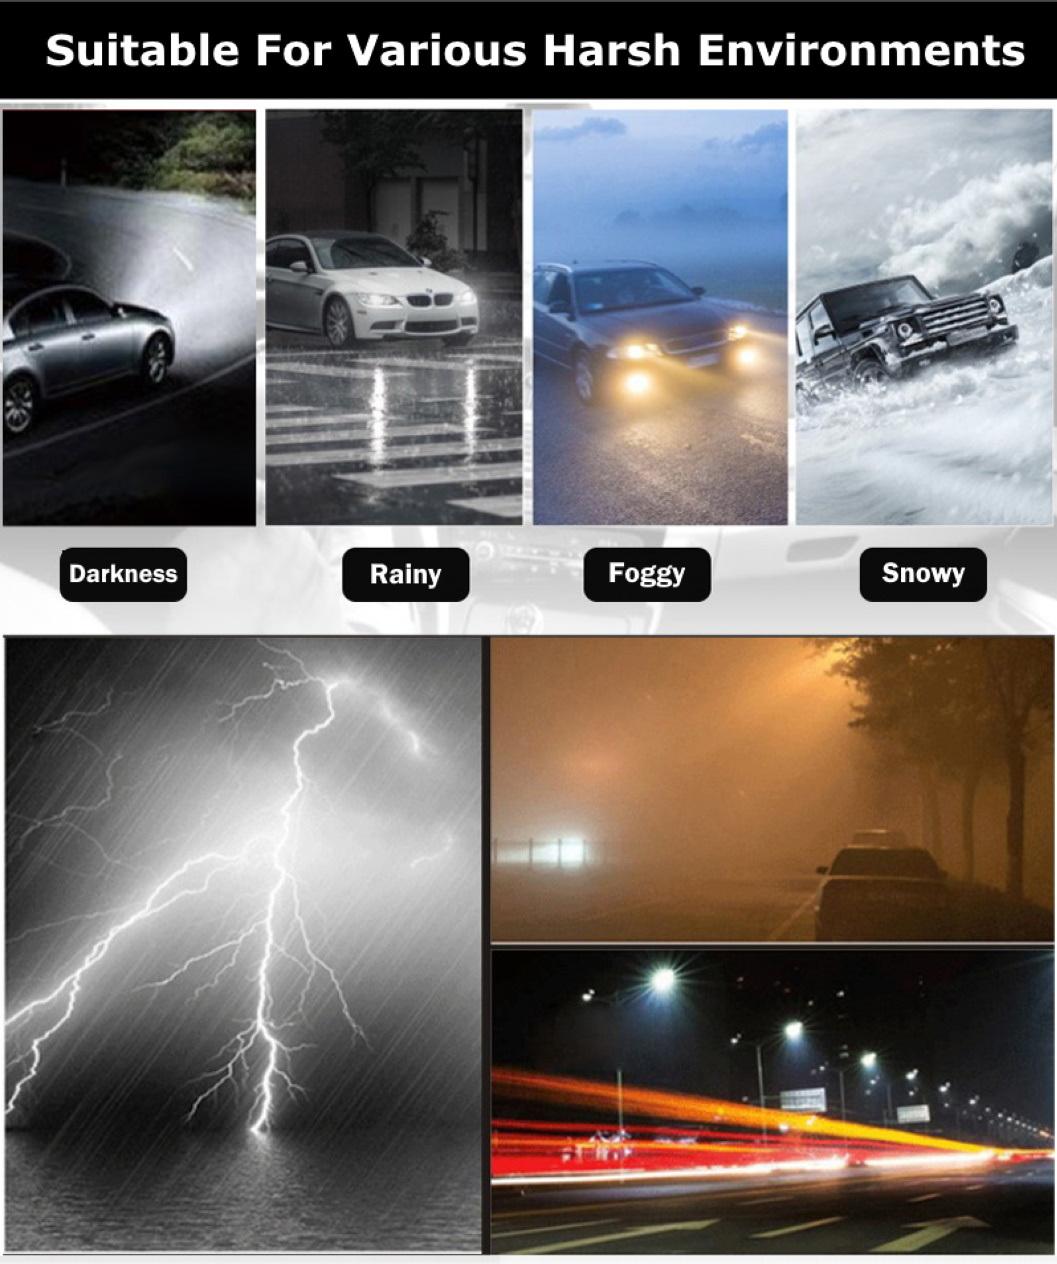 Hot Sell S1 8000lm IP67 12V H1 H3 H4 H7 H11 H13 9005 9004 9007 9006 LED Car Headlight for Auto Car